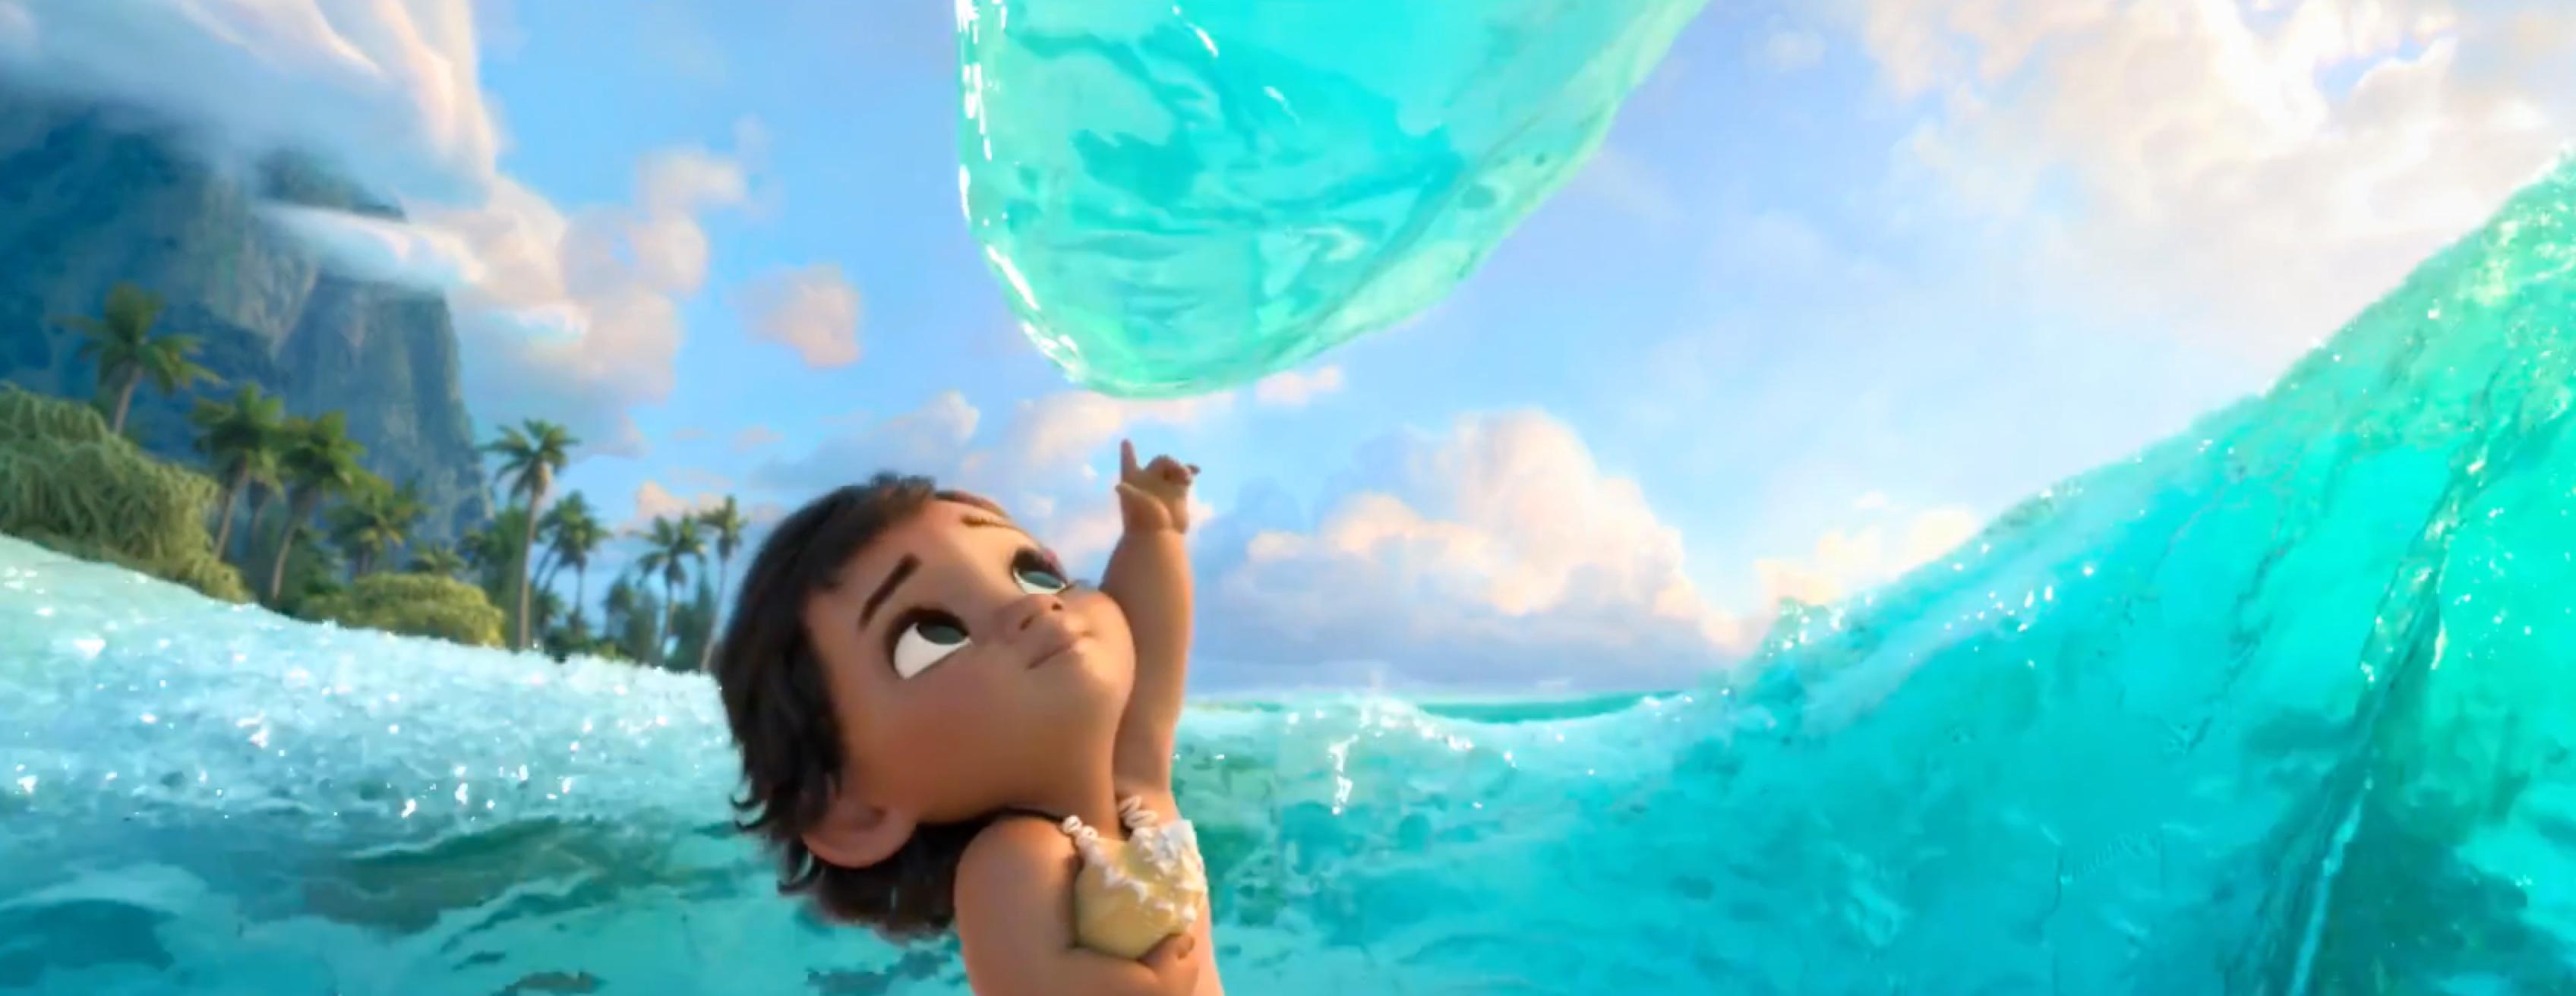 Disney's Moana Characters and Voice Cast Revealed